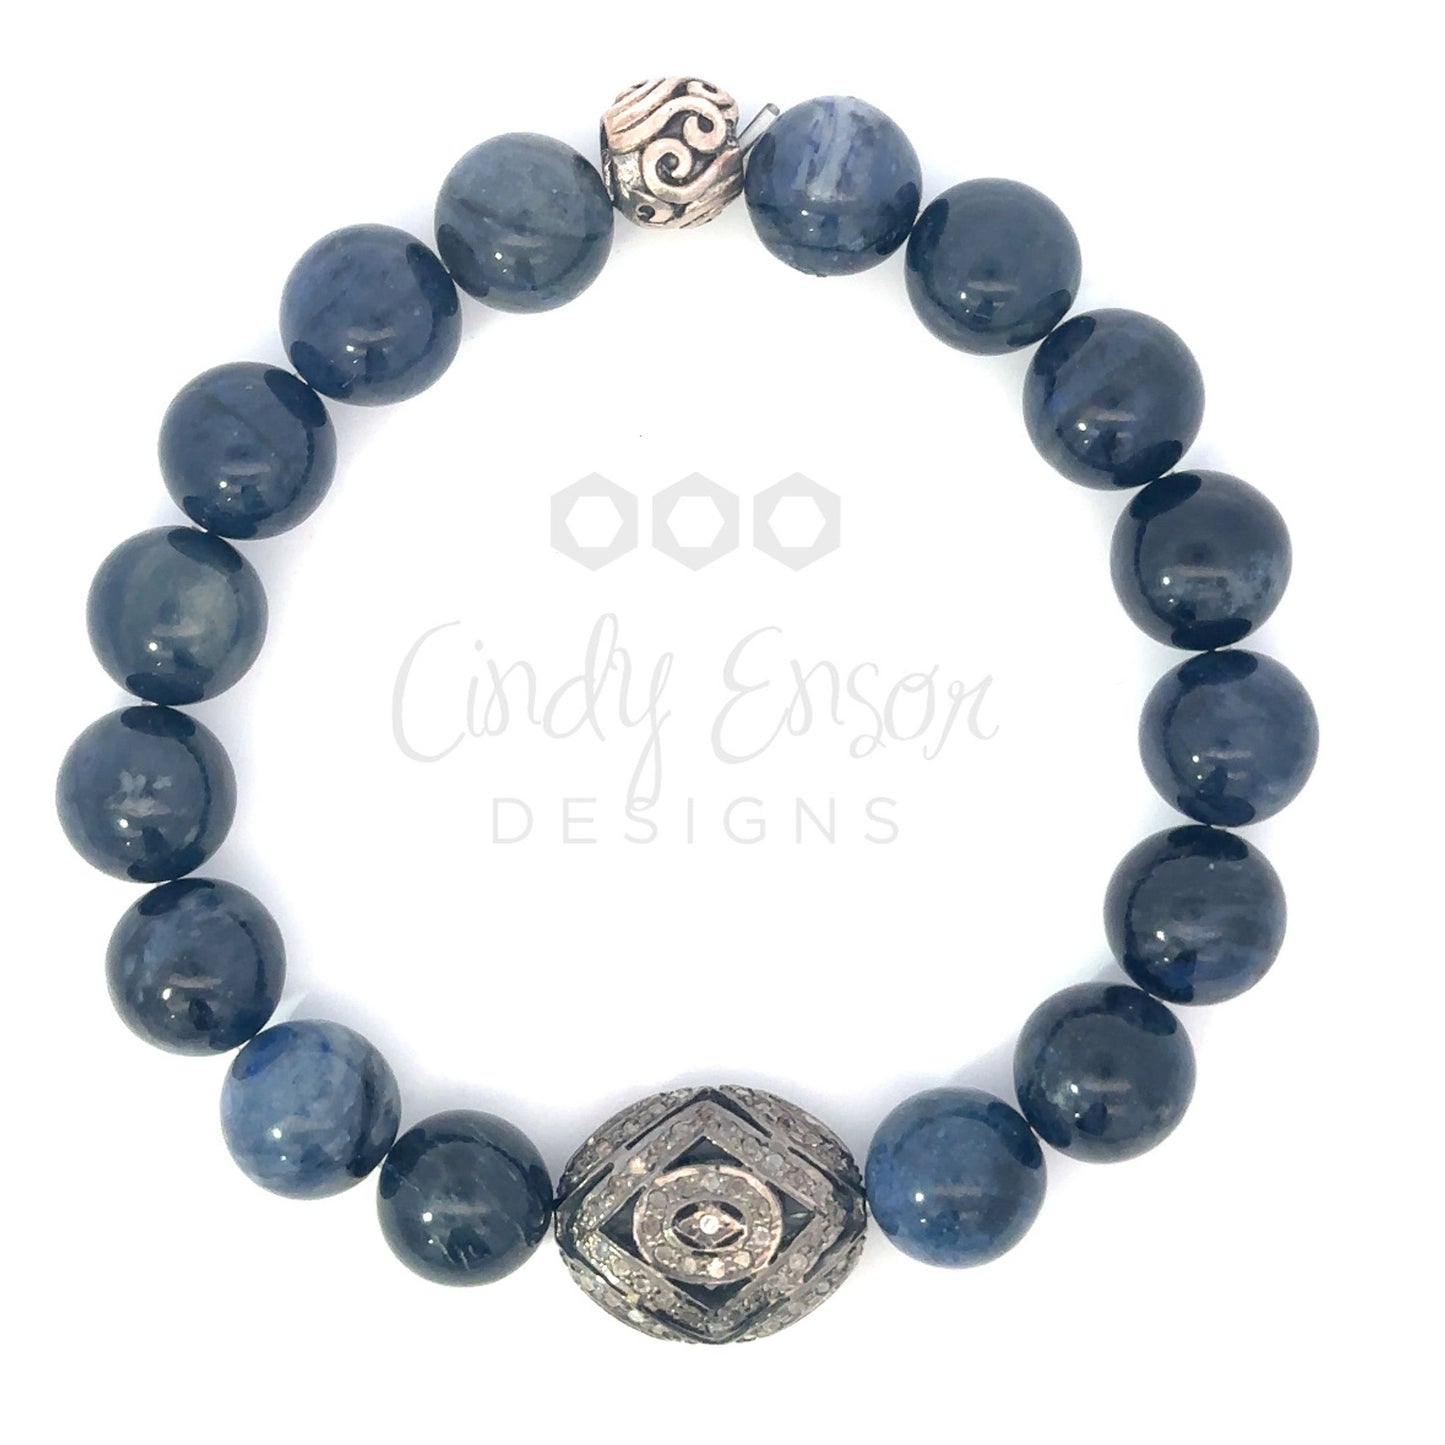 Men's Blue Agate Bead Bracelet with Sterling Pave Diamond Accent Bead